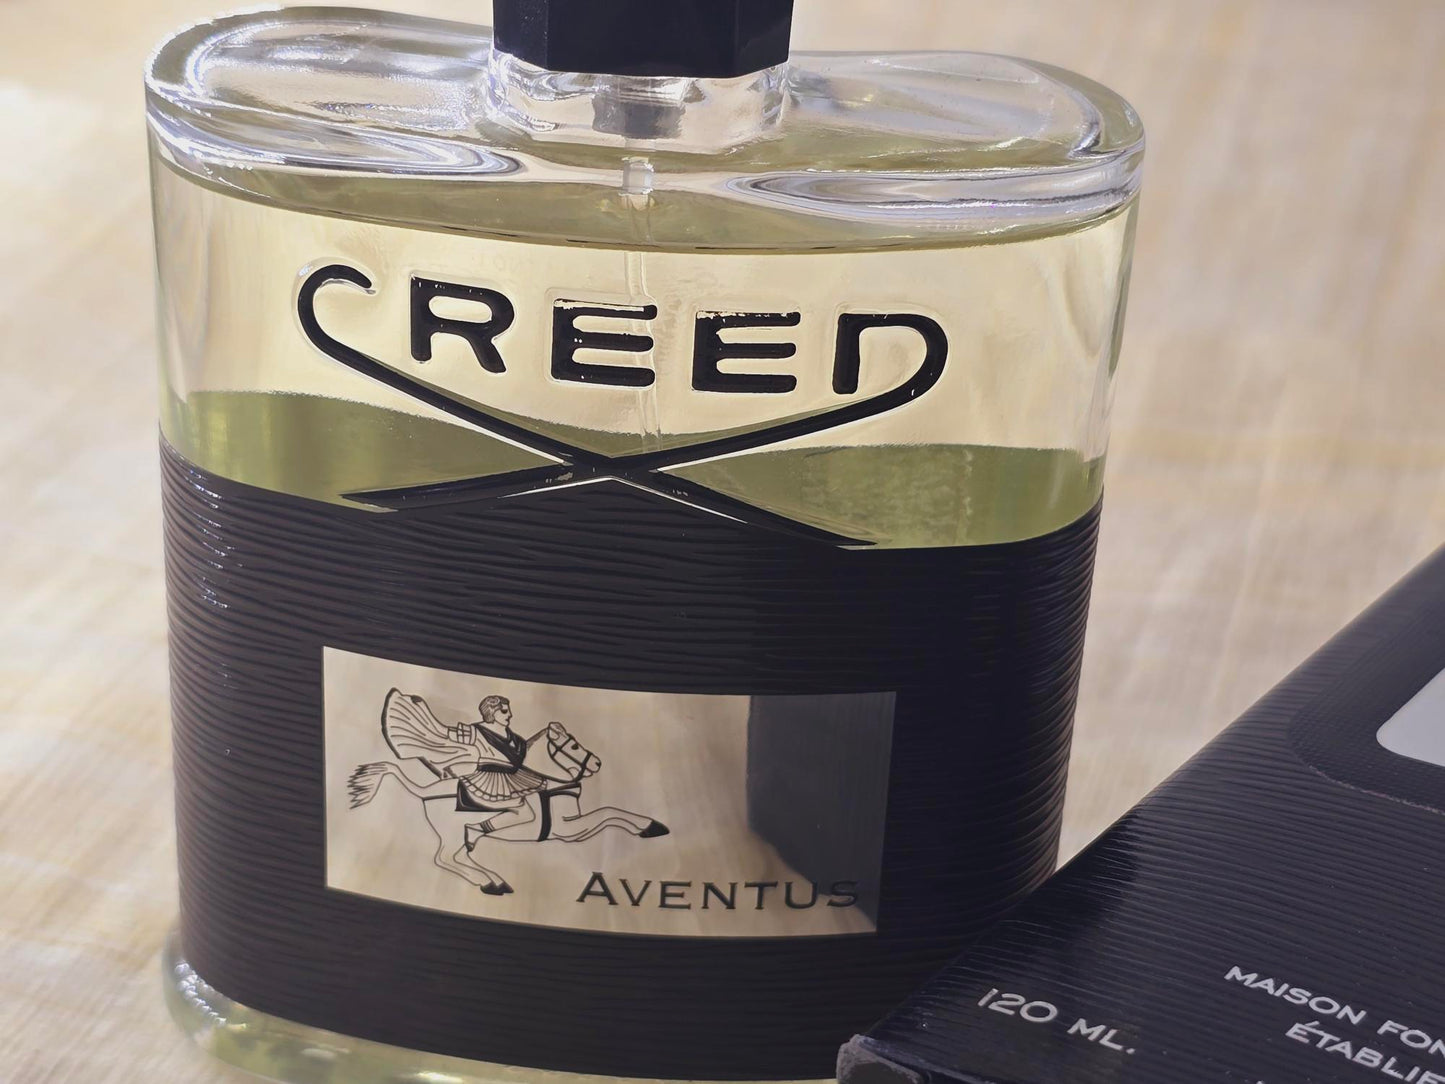 Aventus by Creed EDP Spray (2017 17N01) 120 ml 4 oz, Ultra Rare, Vintage, 100% Authentic!, Used As Pics